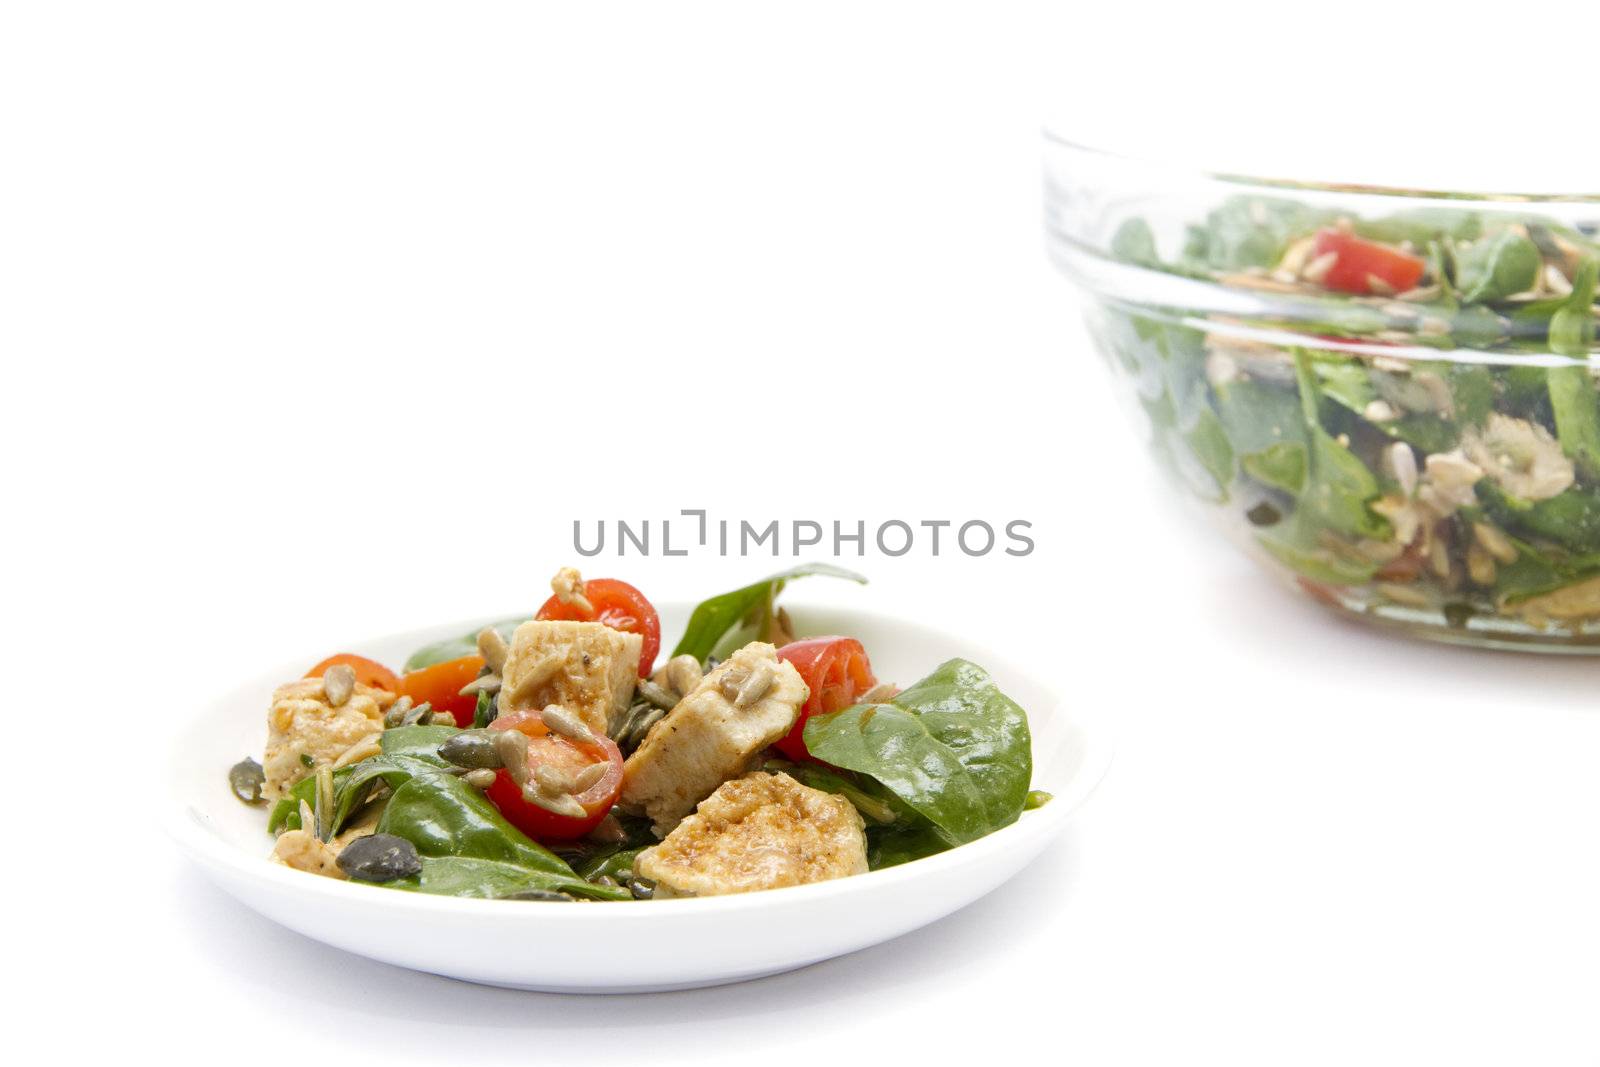 Spinach and chicken salad over white background